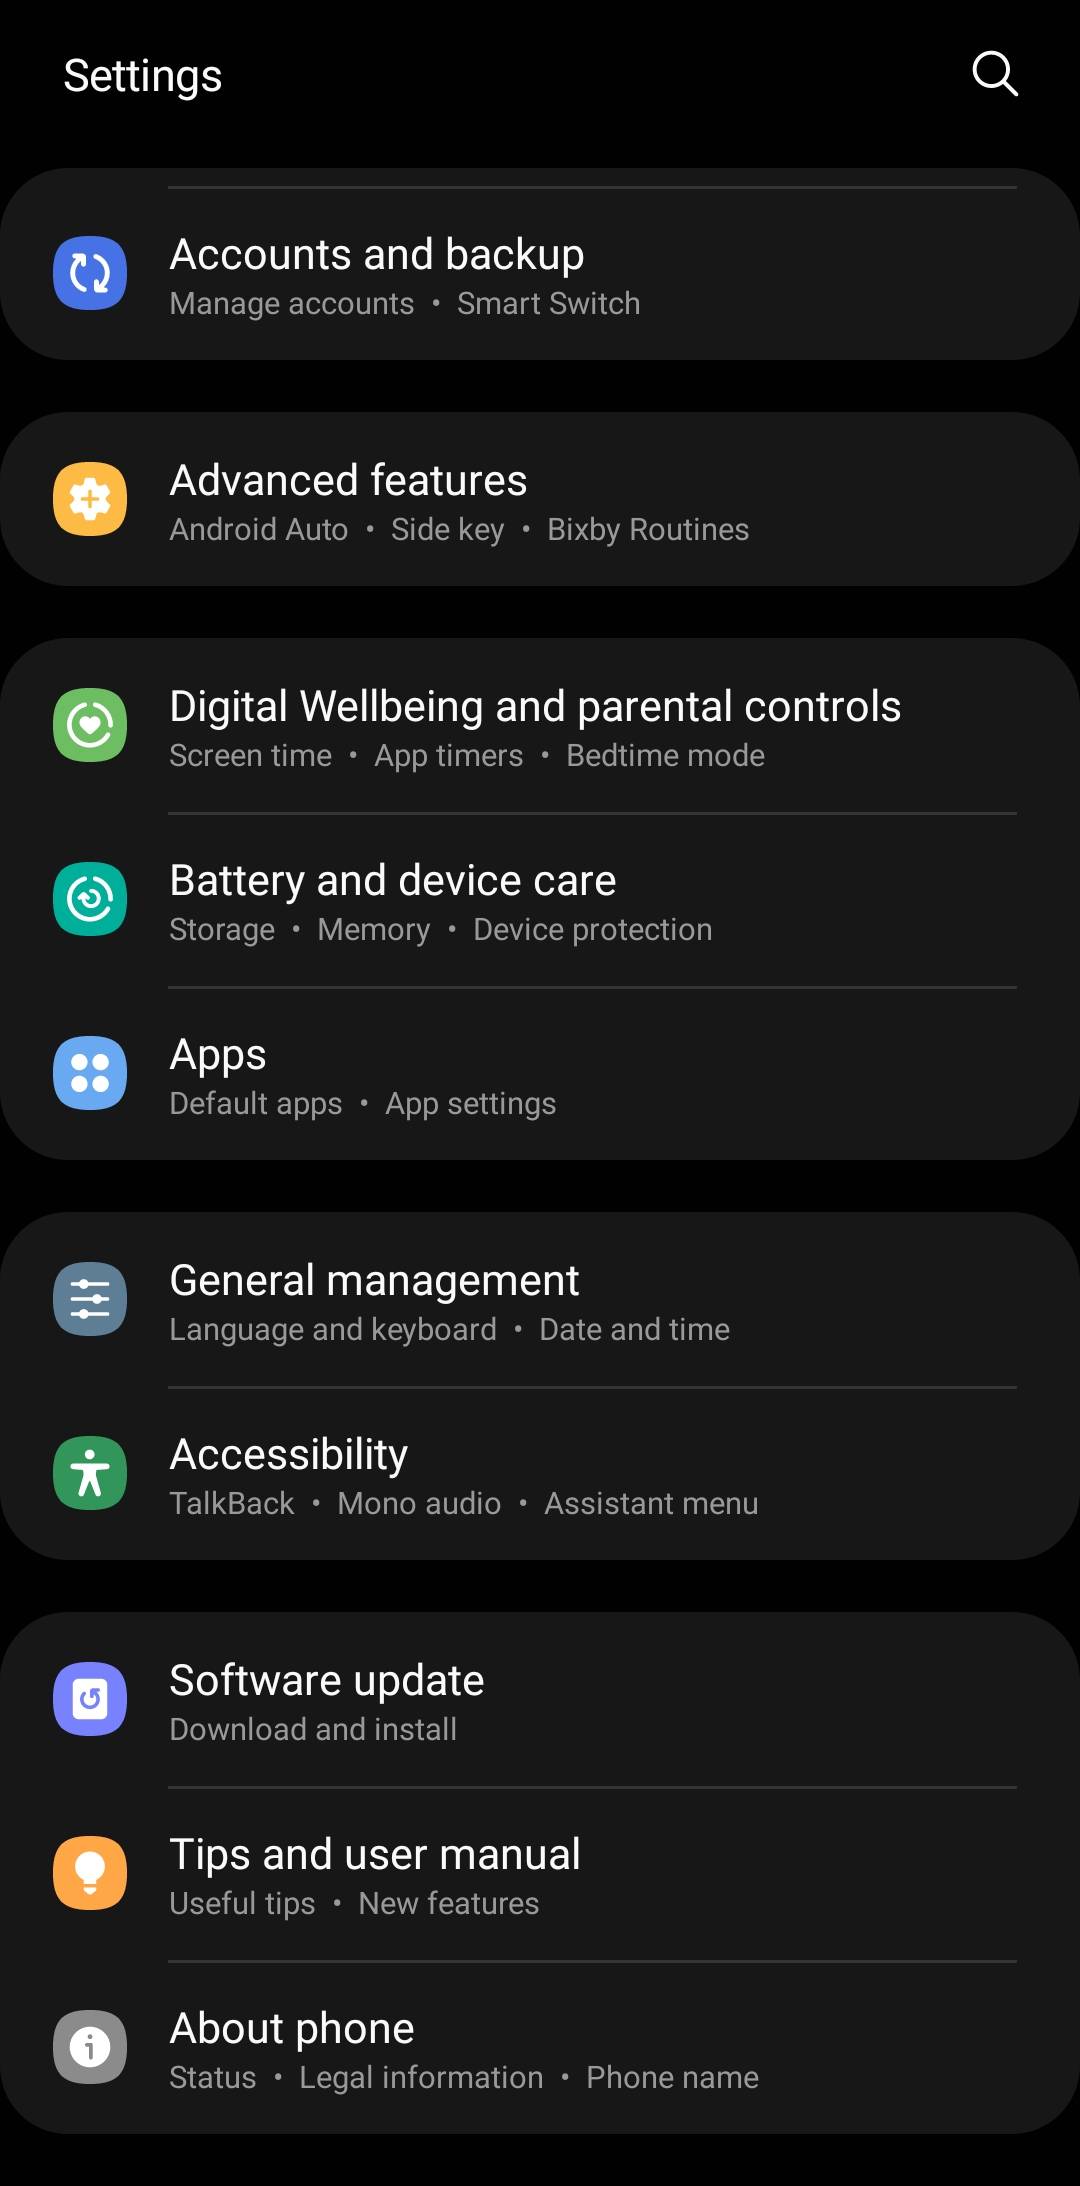 How To Schedule Power On/Off Samsung Device - Samsung Members